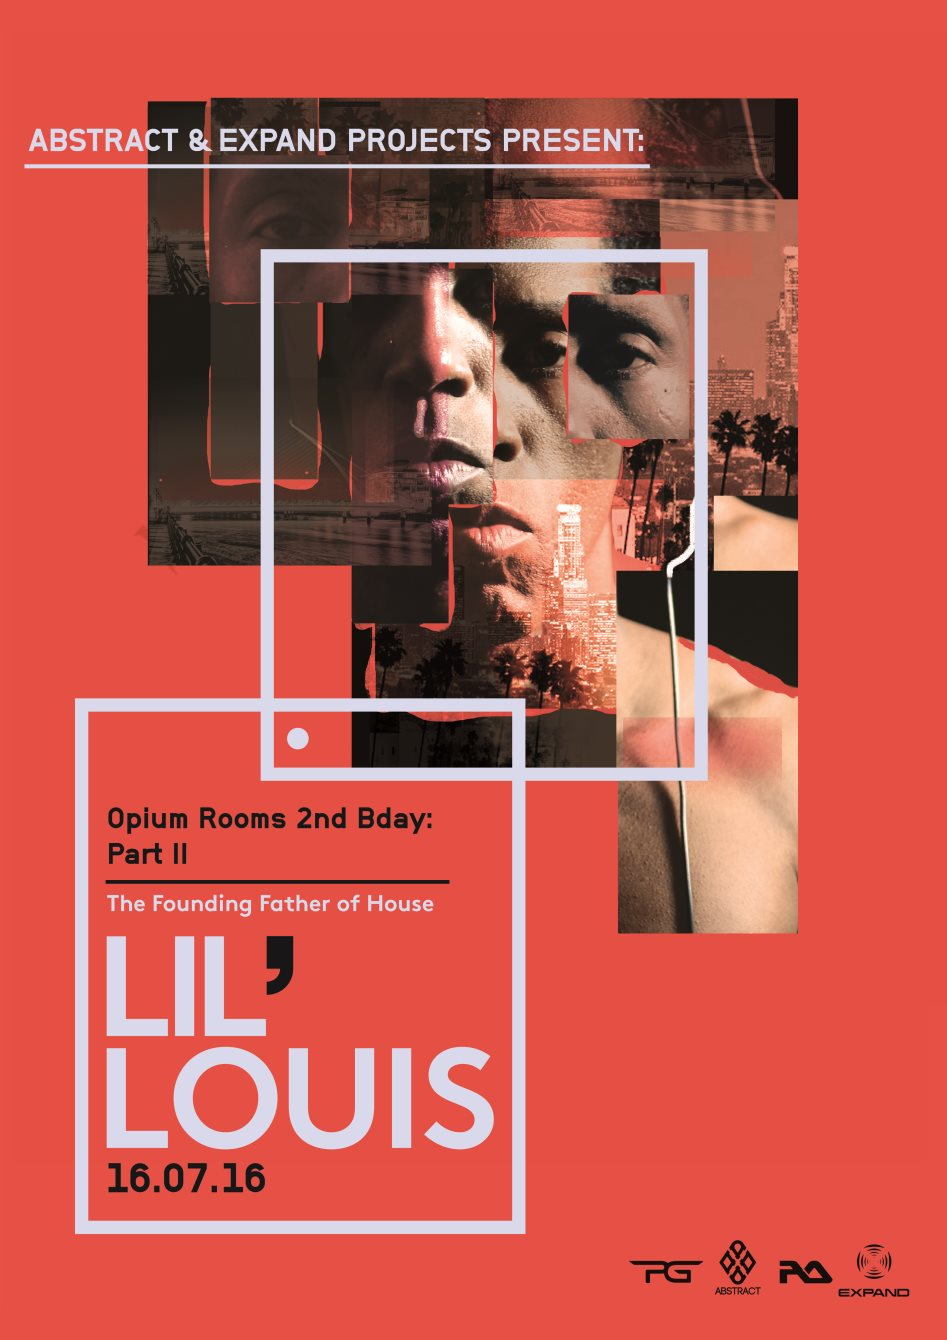 Abstract & Expand Projects present: Lil Louis - The Founding Father Of House Music - Flyer back